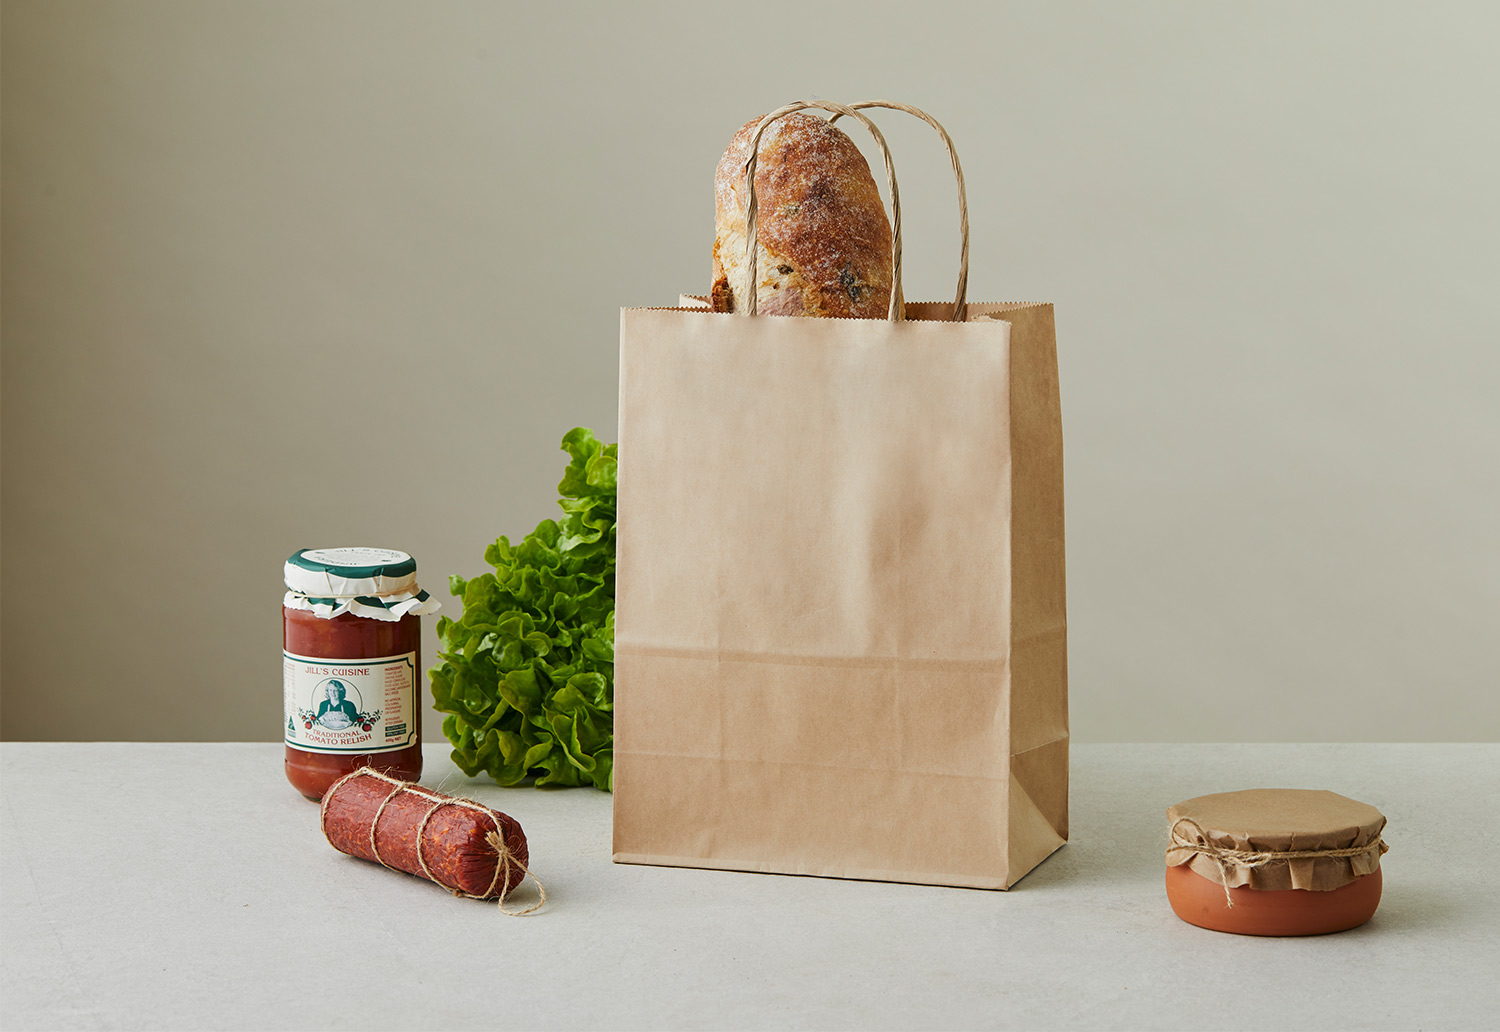 Image of sustainable brown paper bag from Detpak